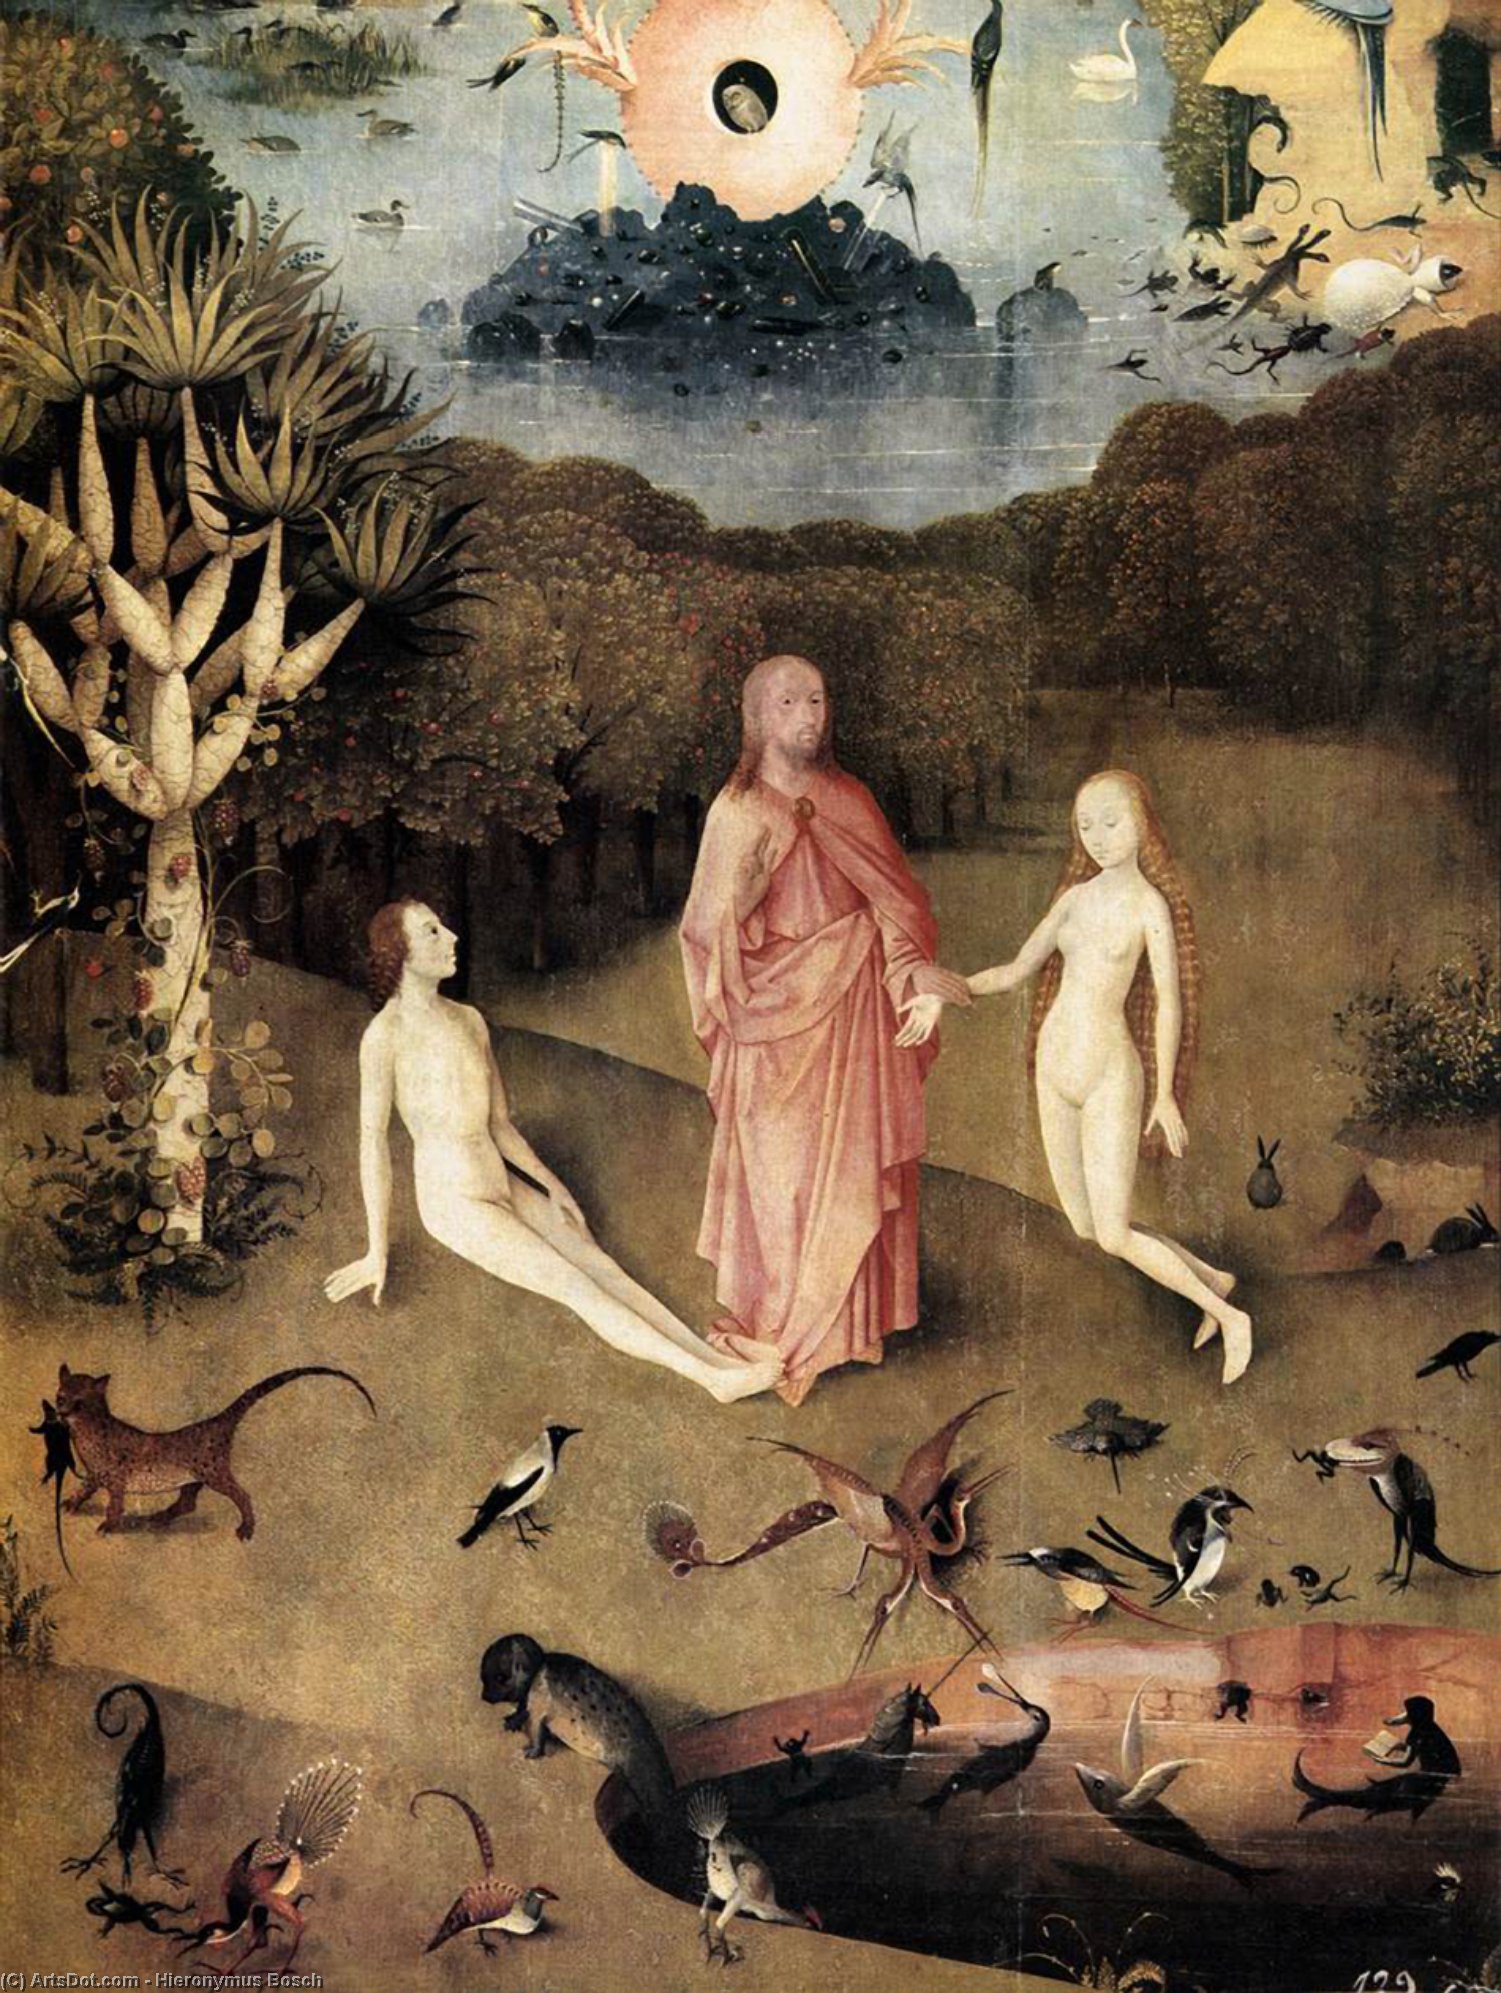 WikiOO.org - Encyclopedia of Fine Arts - Lukisan, Artwork Hieronymus Bosch - Triptych of Garden of Earthly Delights (detail) (33)